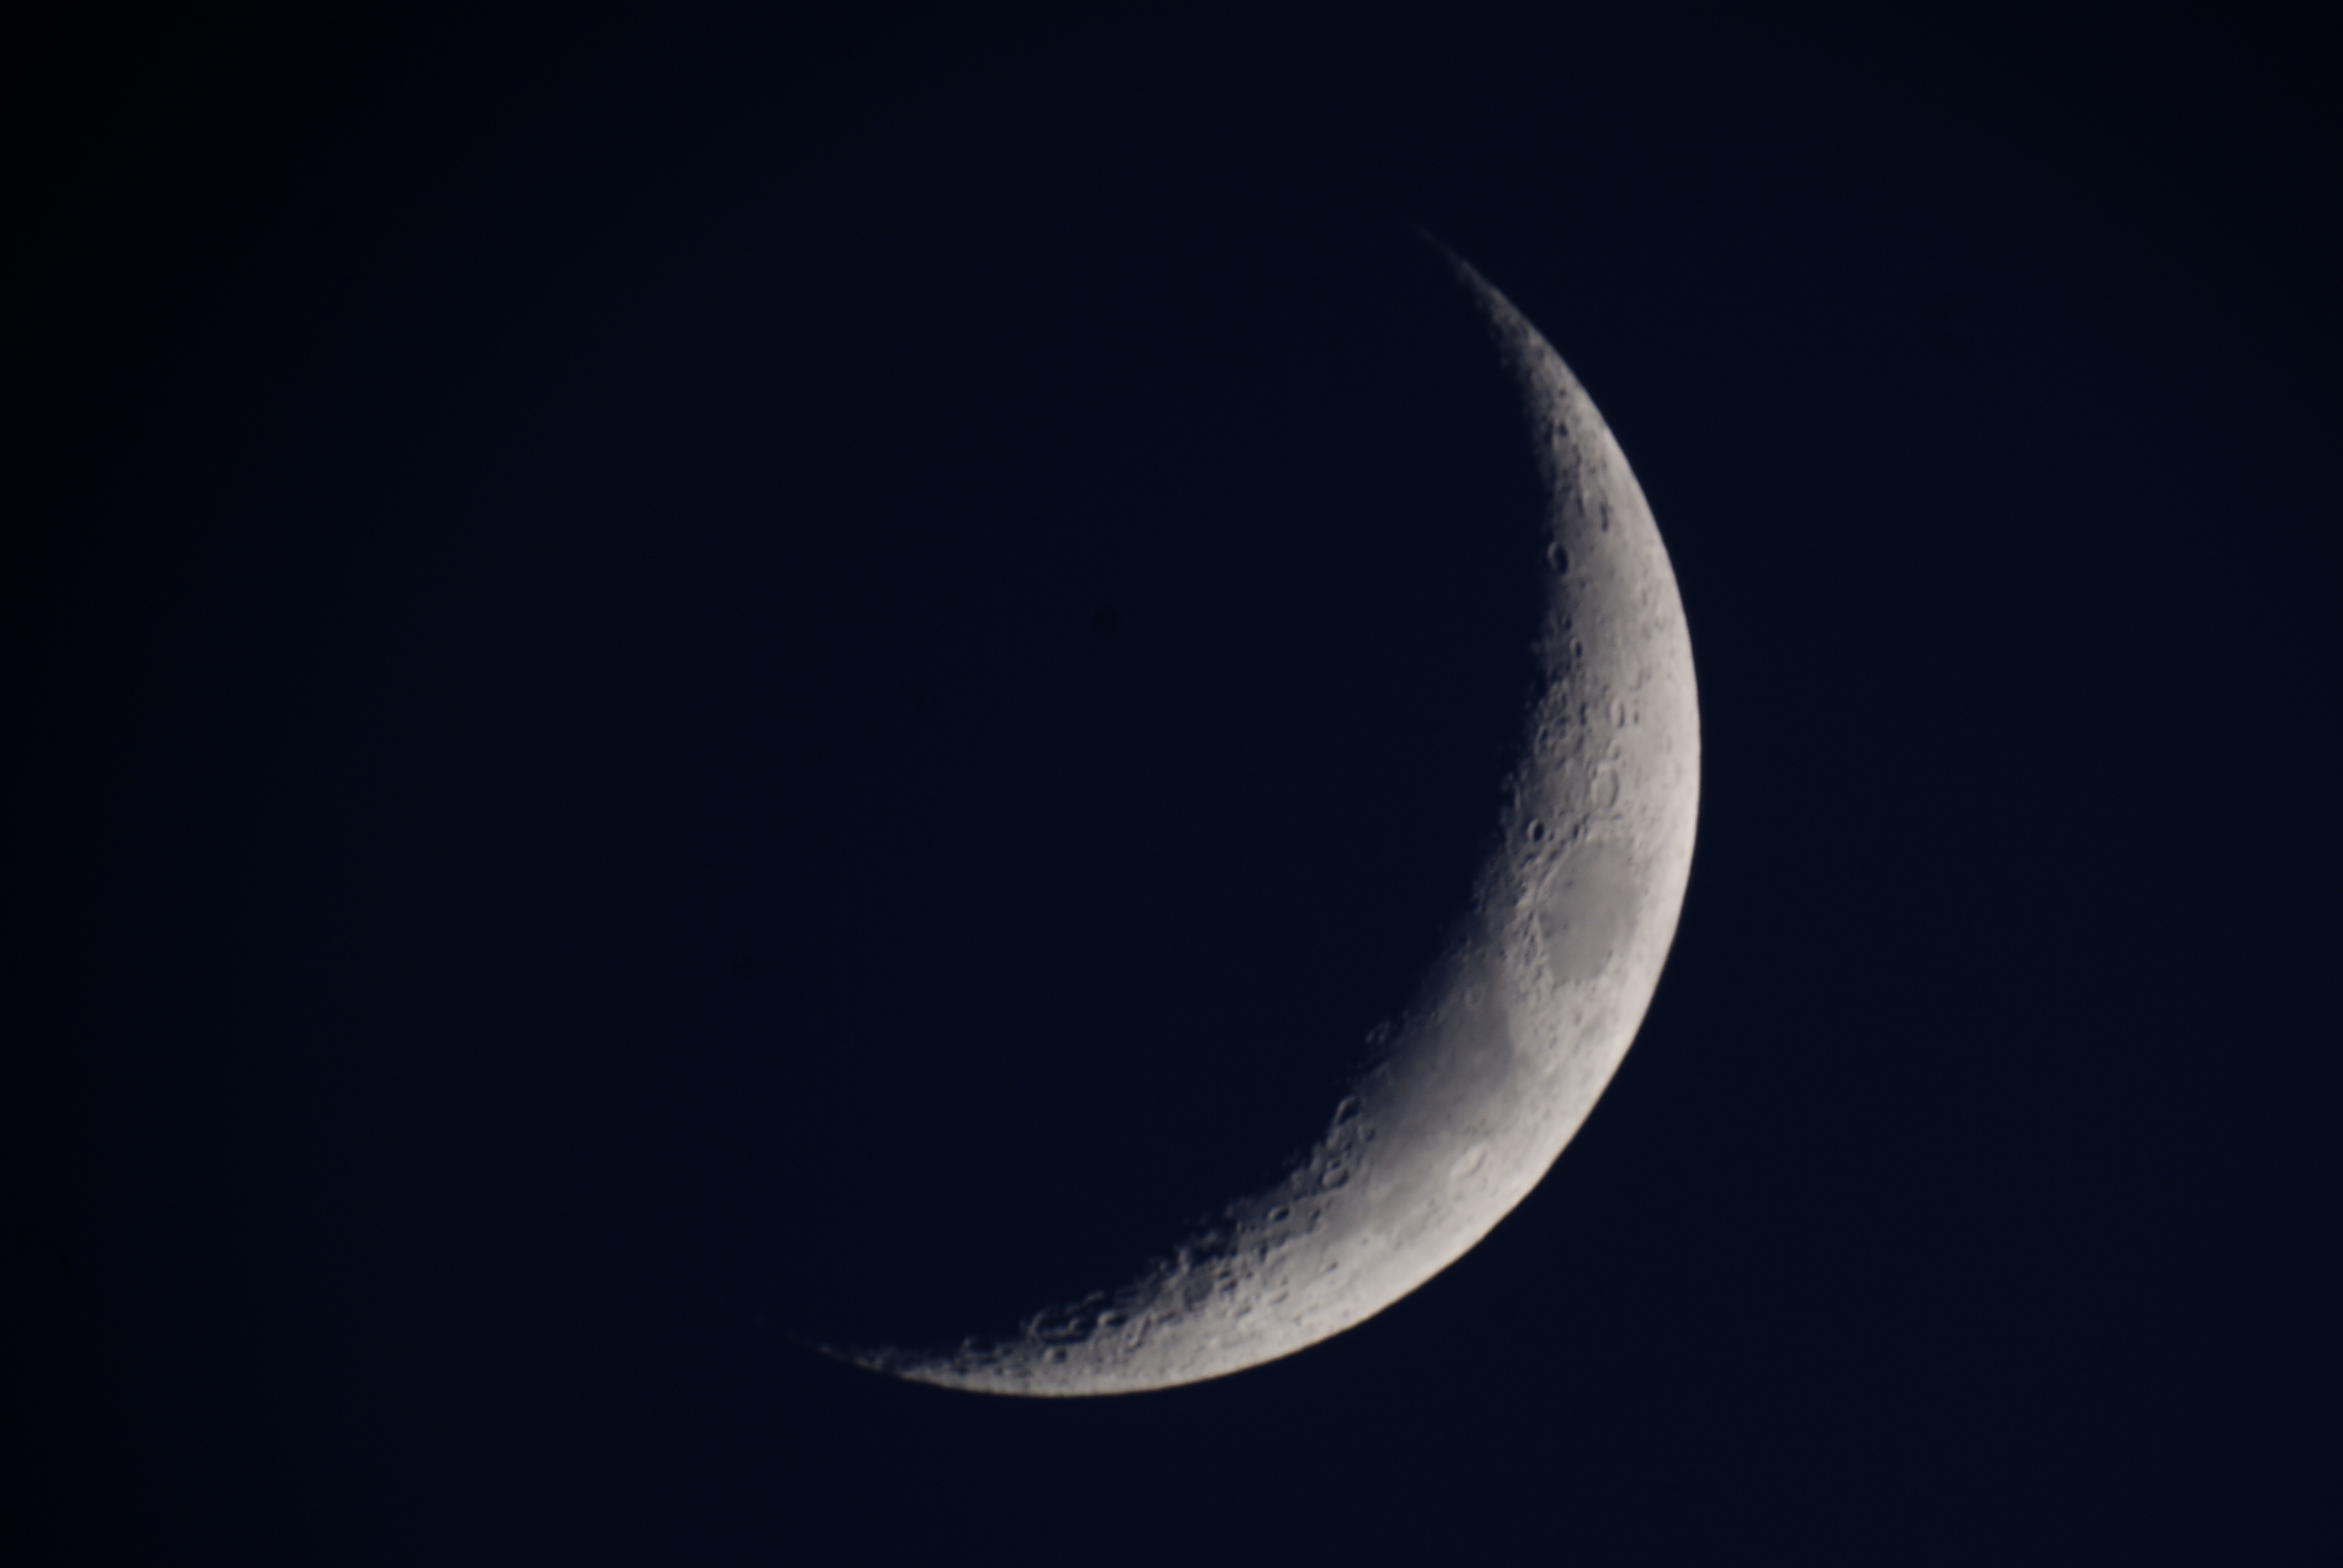 Moon by Bill Samson.  I got this shot of the crescent moon last night (19 04 2018) at 19.51 UT using a Skywatcher Skymax 102 with a Sony A330 DSLR at prime focus -1/10 sec at f12.